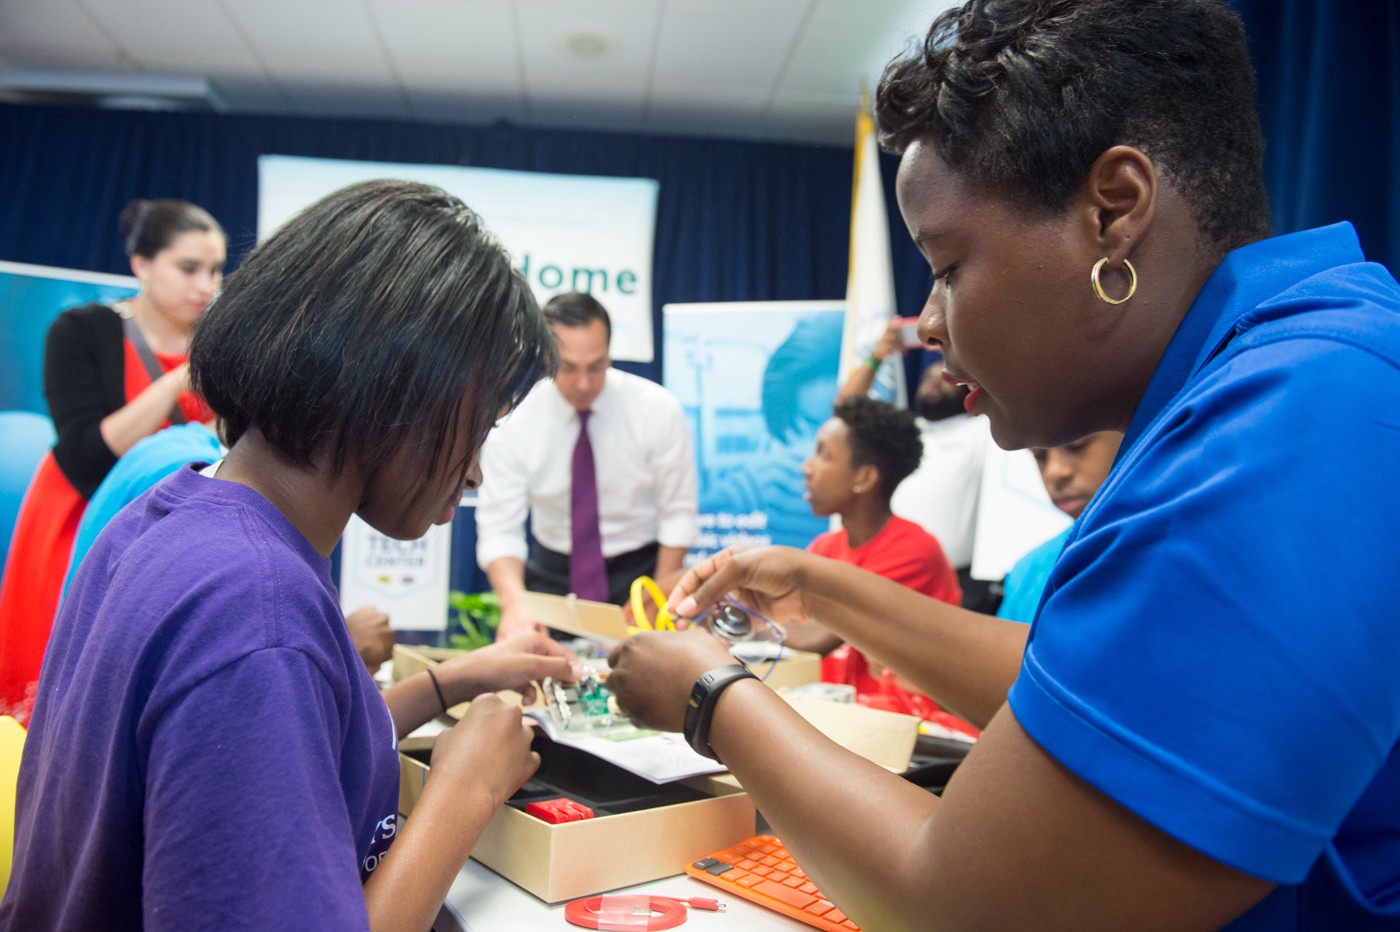 Washington, D.C. | Students build personal computers to take home at the Best Buy Teen Tech Center at the Boys & Girls Club of Greater Washington.